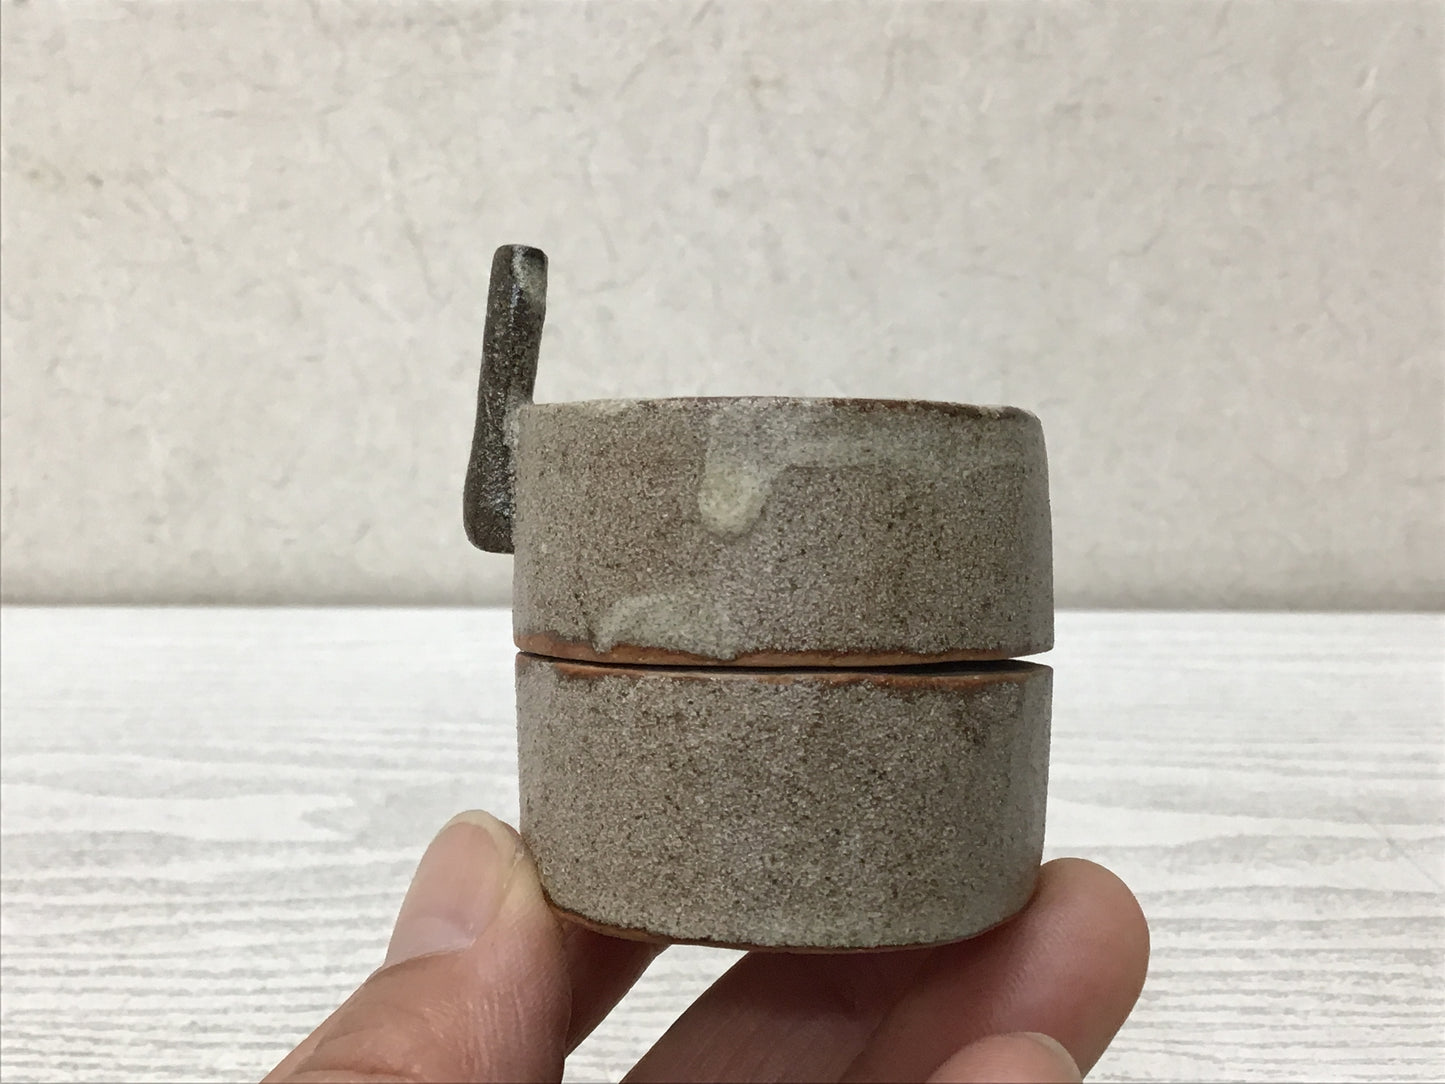 Y2779 BOX Seto-ware Milling Mortar signed box Japanese incense container antique